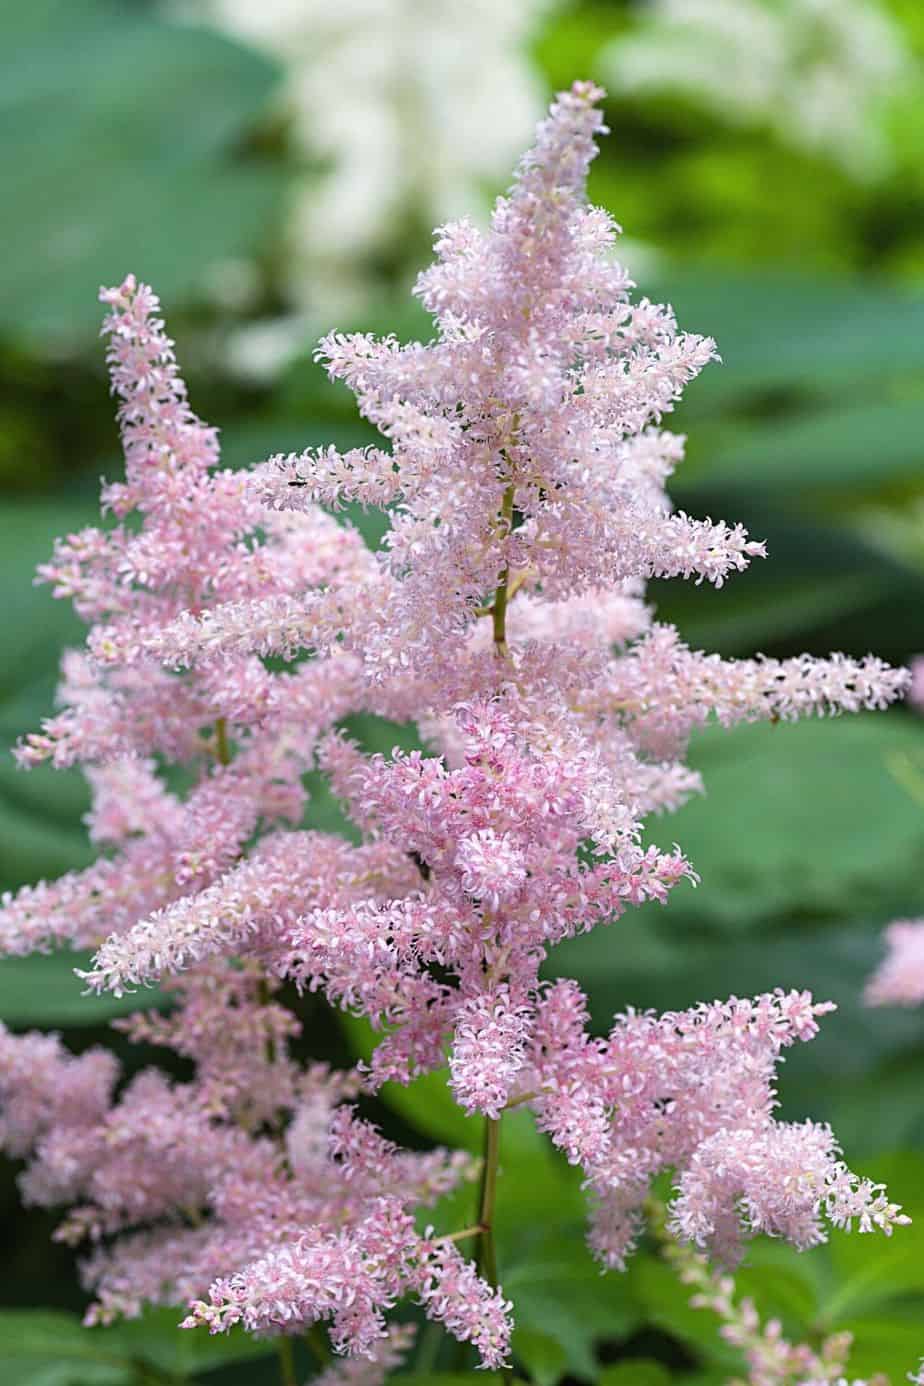 Astilbe, aka False Goat's Beard, will thrive in the north-facing side of the house as they're shade-loving plants